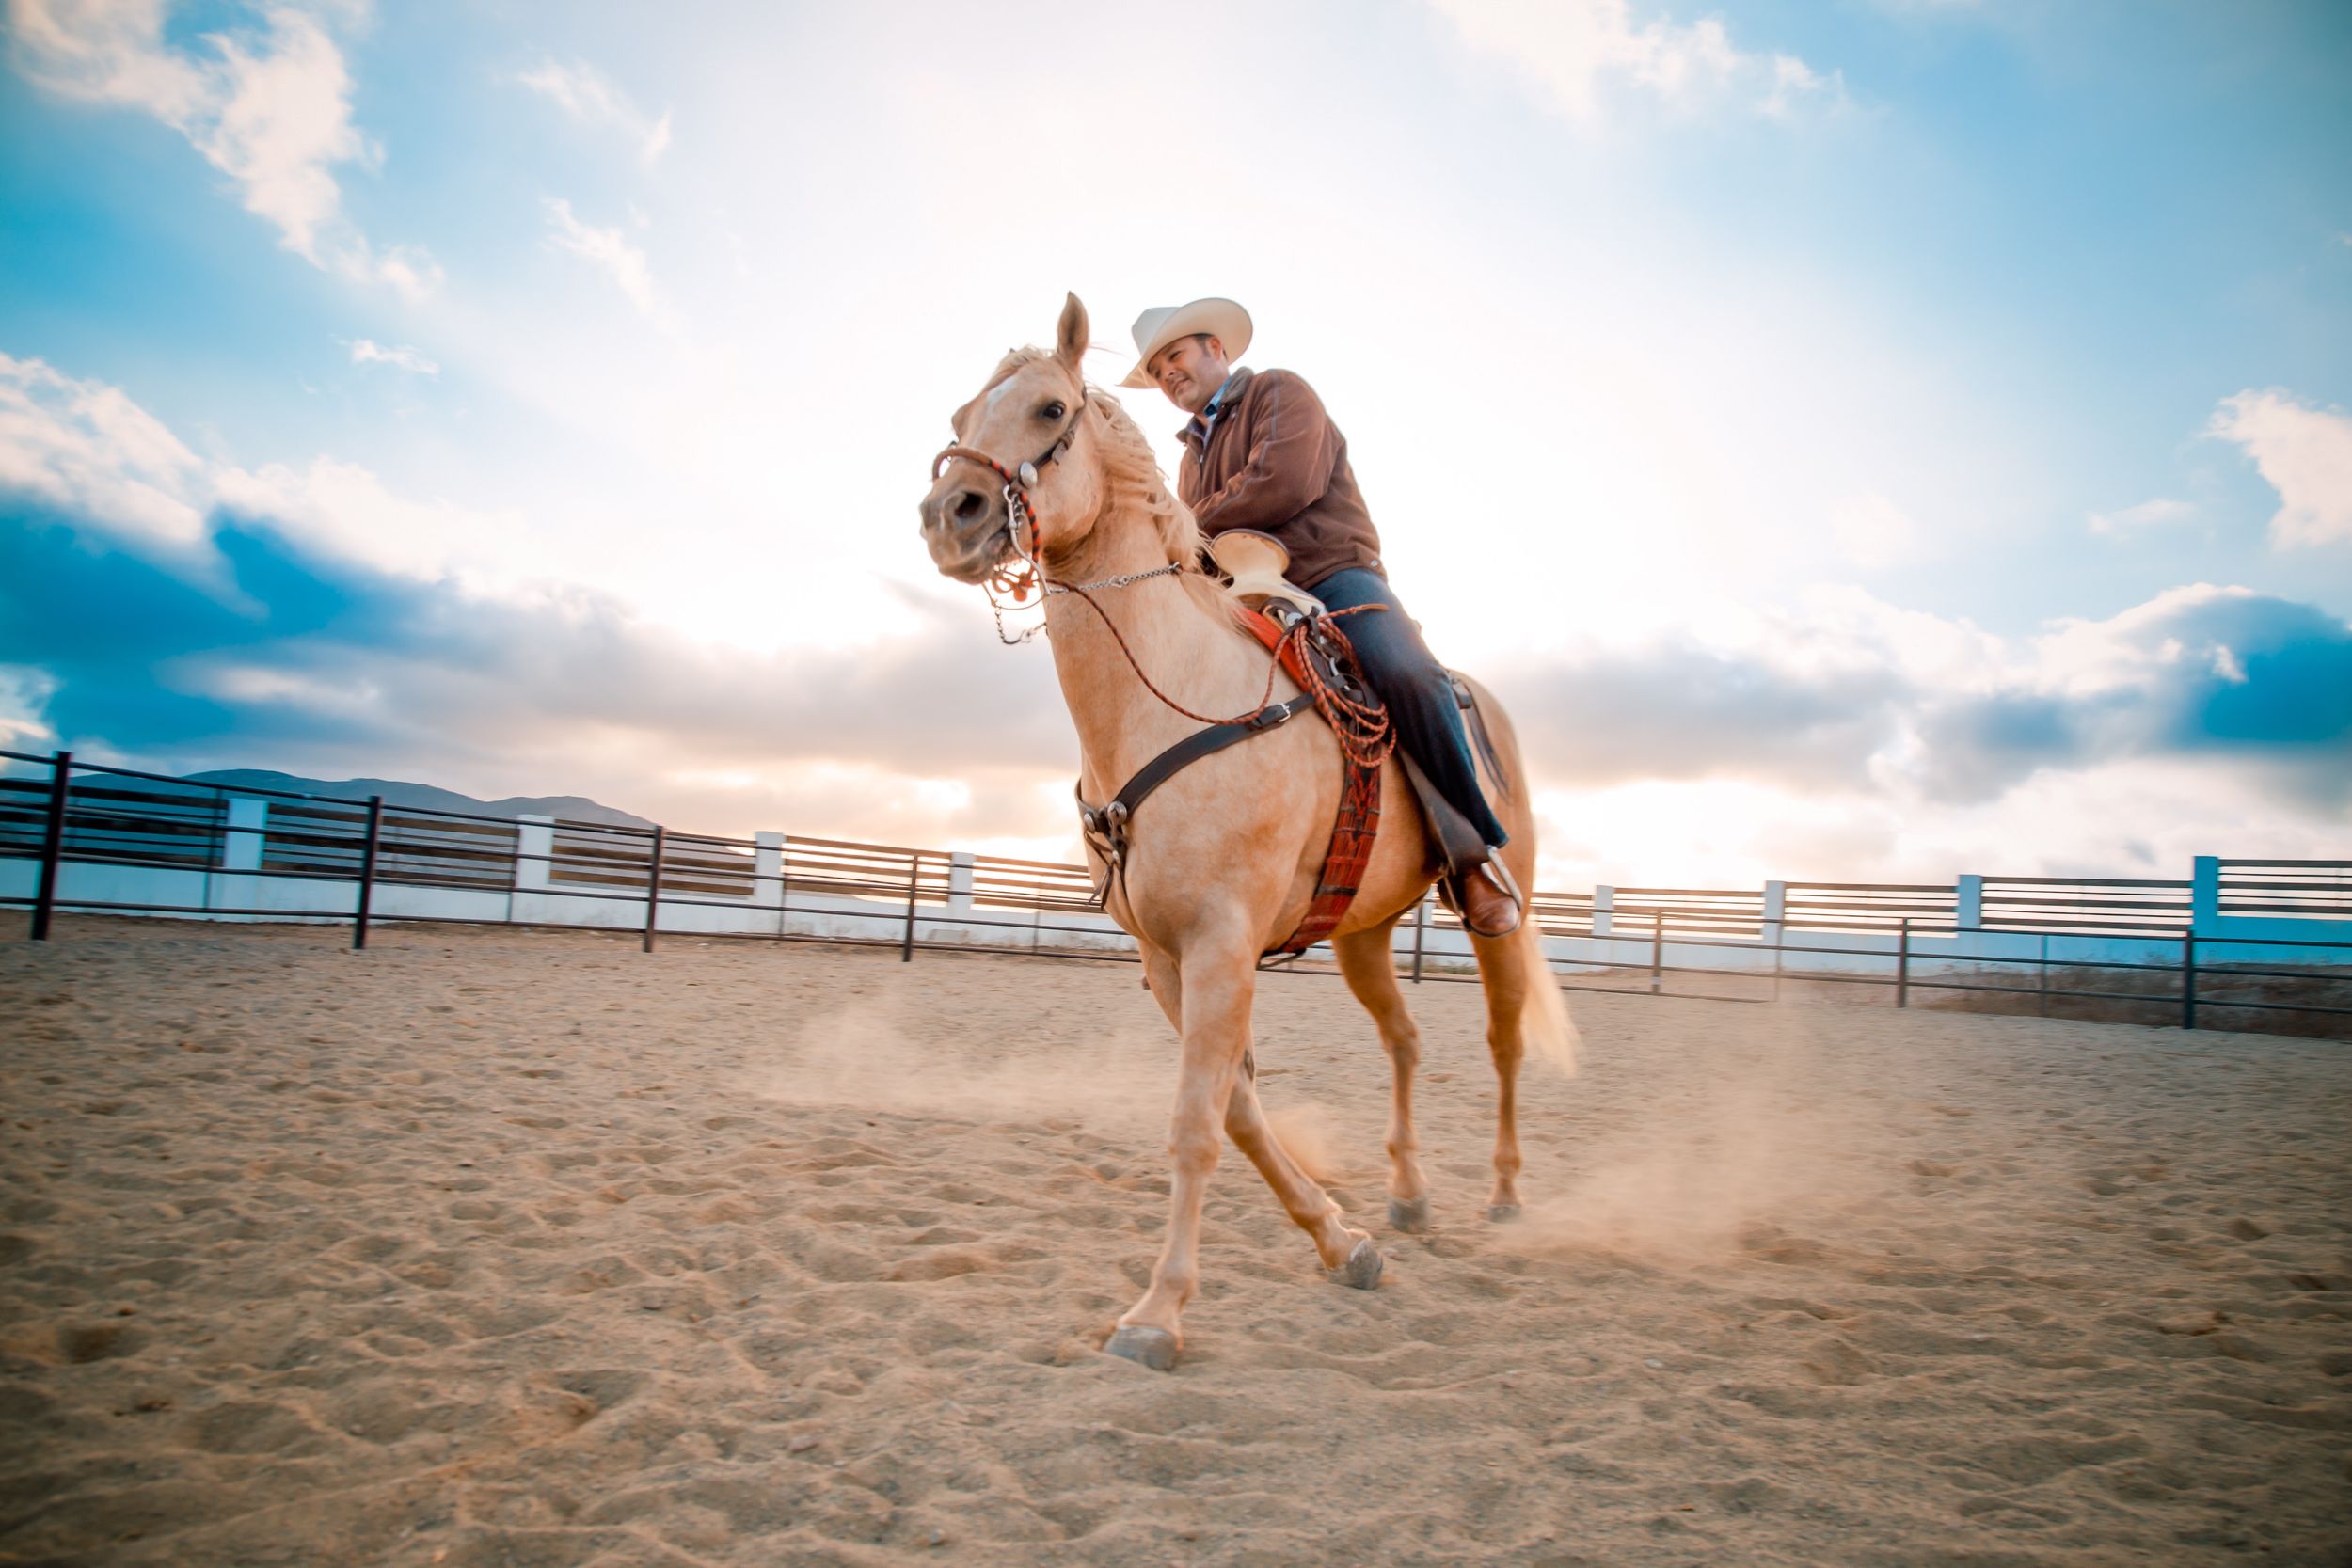 Cowboy rides horse in sand ring